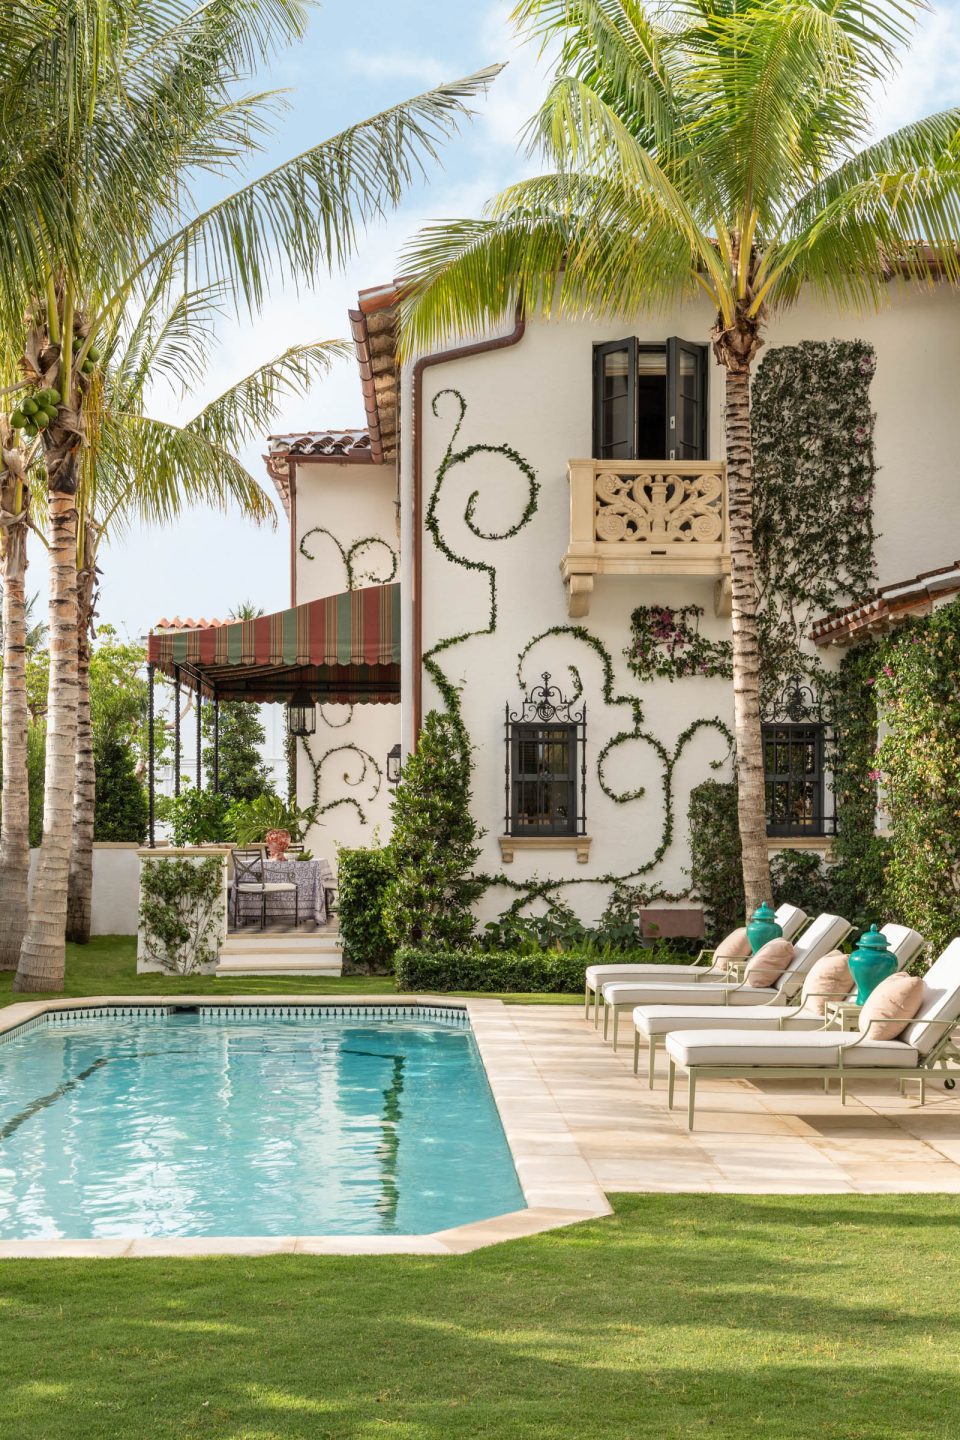 Meet the Team Who Brought This Palm Beach Mansion Back from the Brink